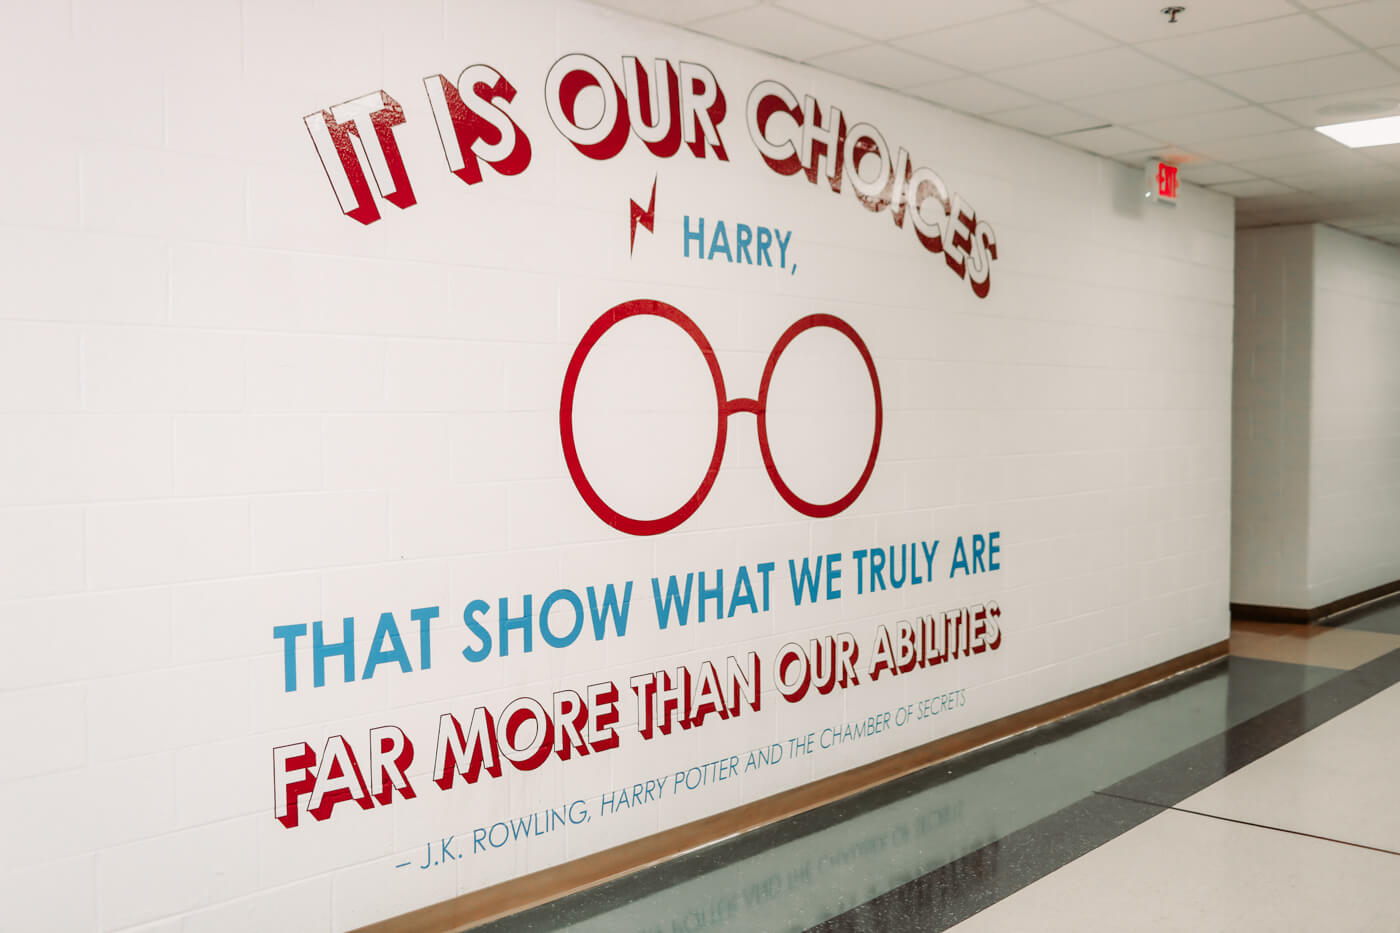 A mural in the school hallway reads "It is our choices Harry, that show what we truly are far more than our abilities" -J.K. Rowling, Harry Potter and The Chamber of Secrets